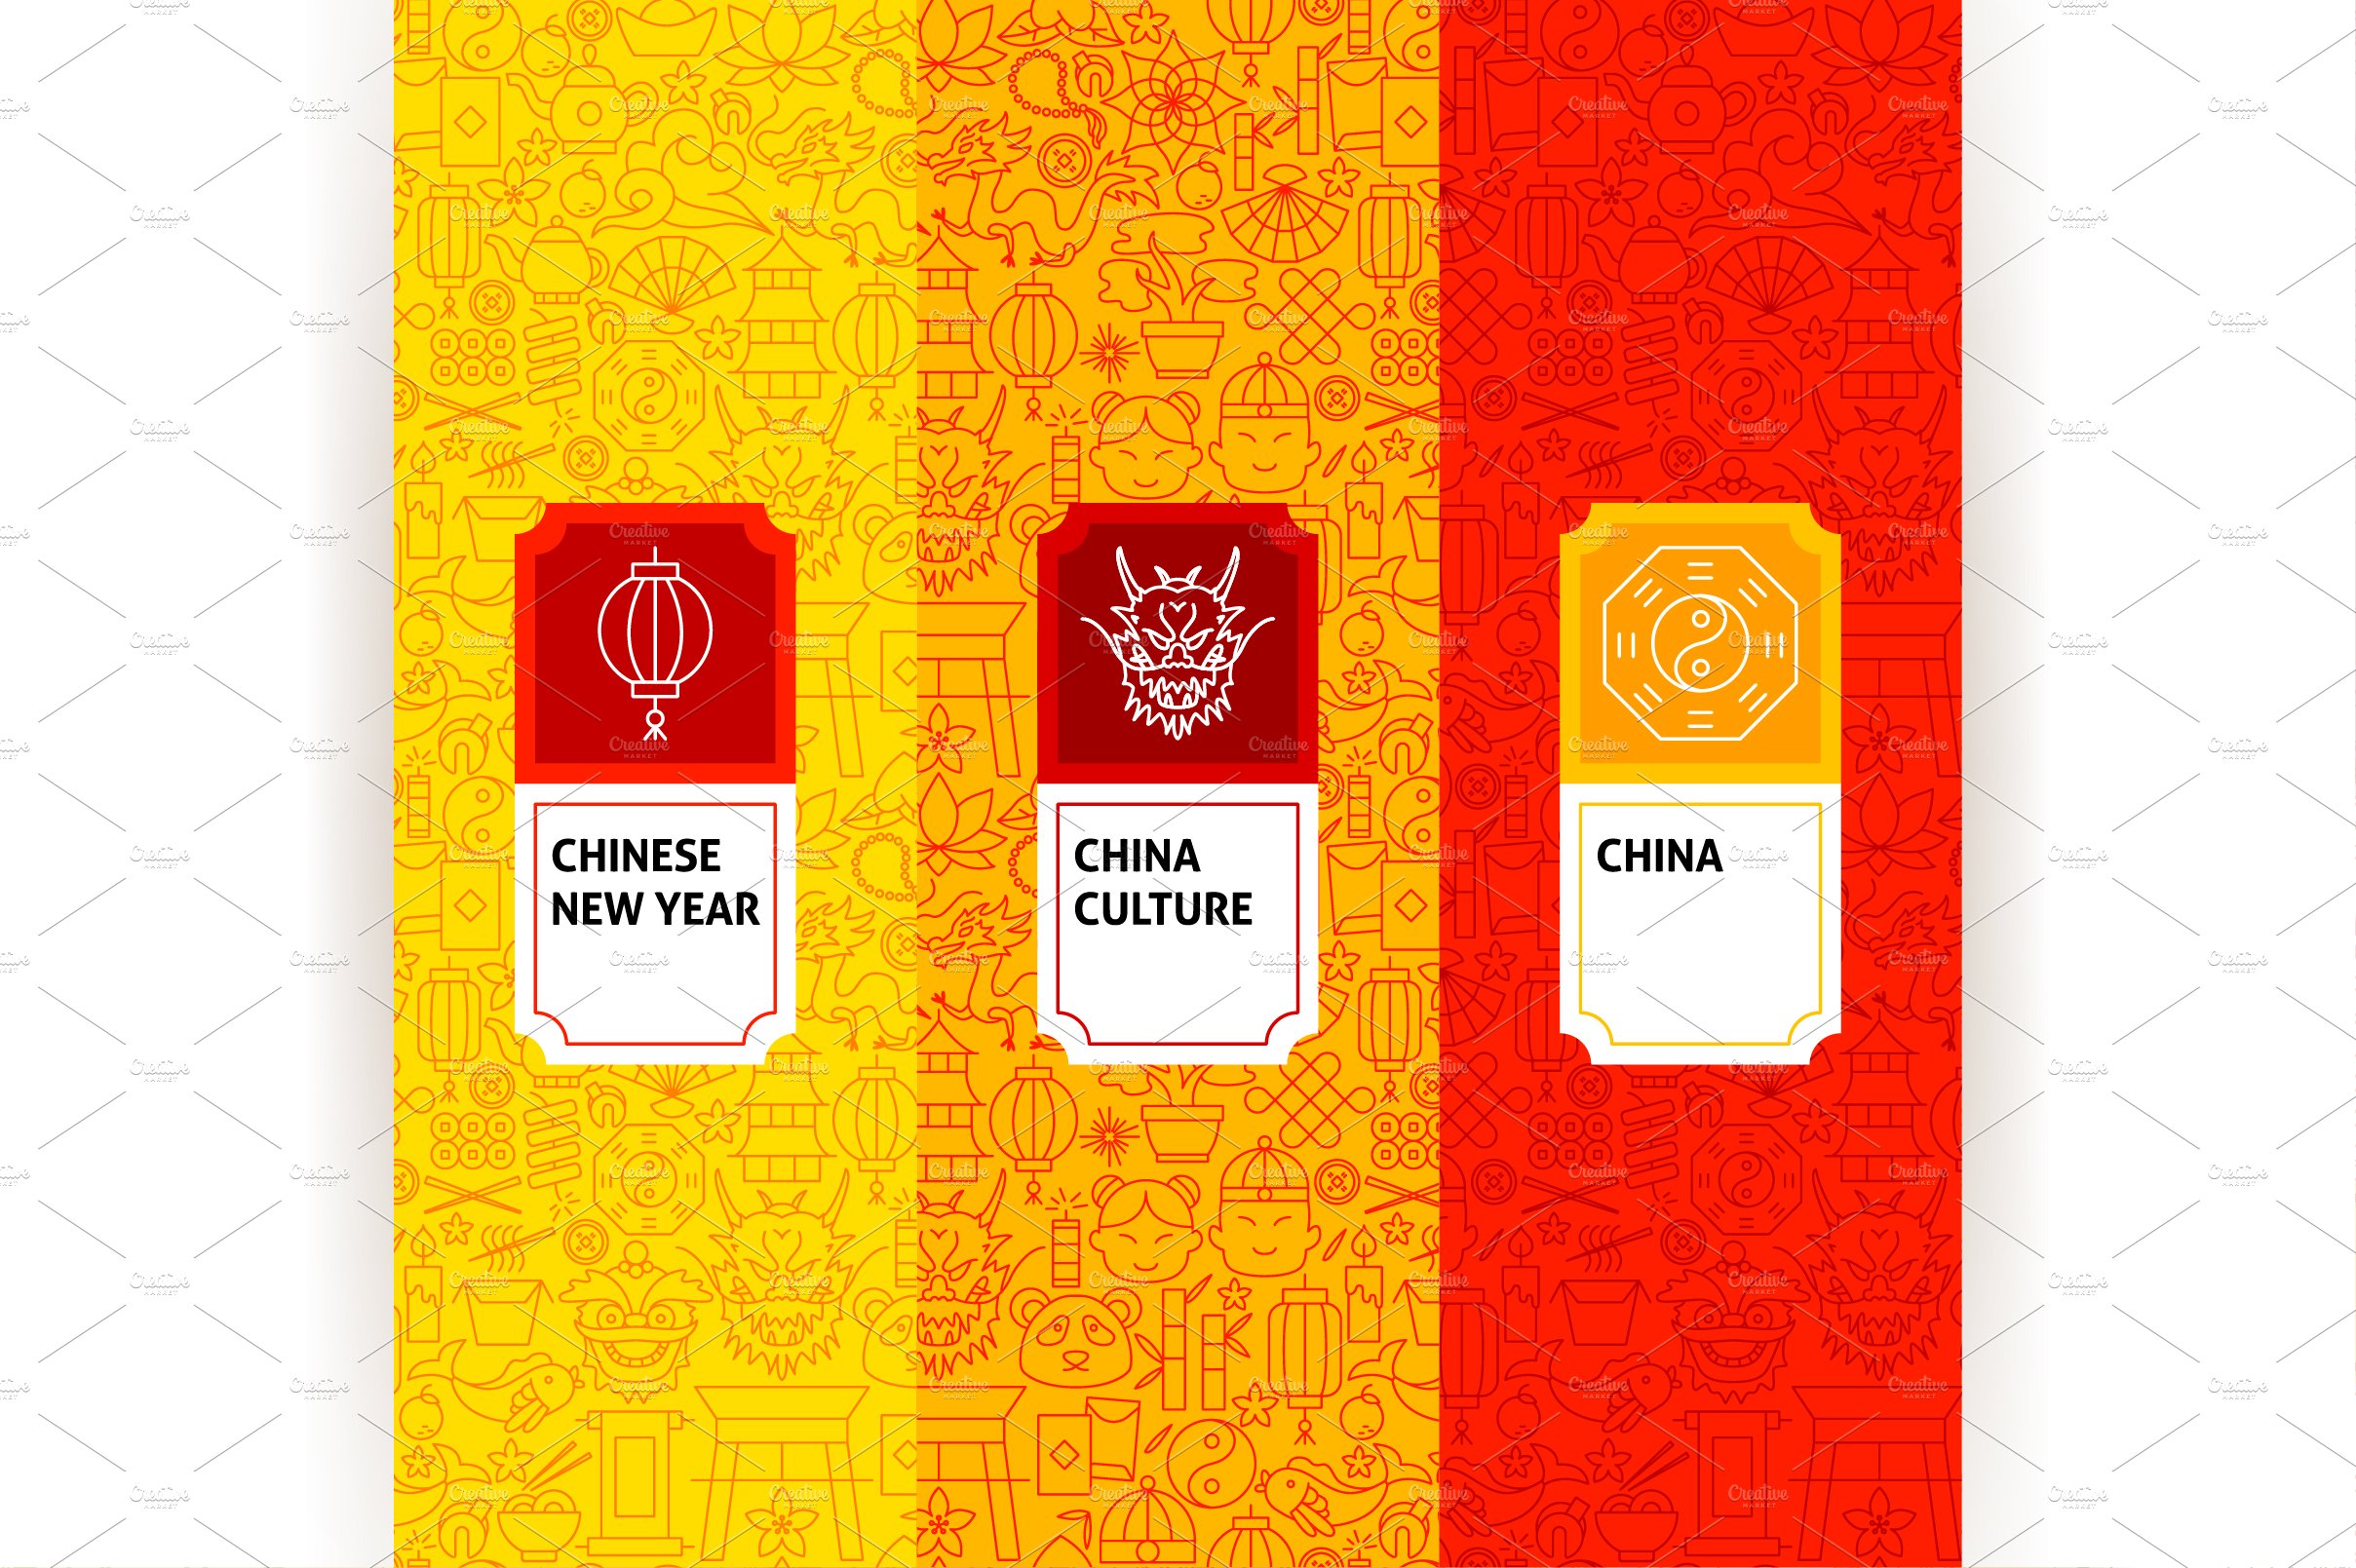 Orange and red background with Chinese New Year icons.